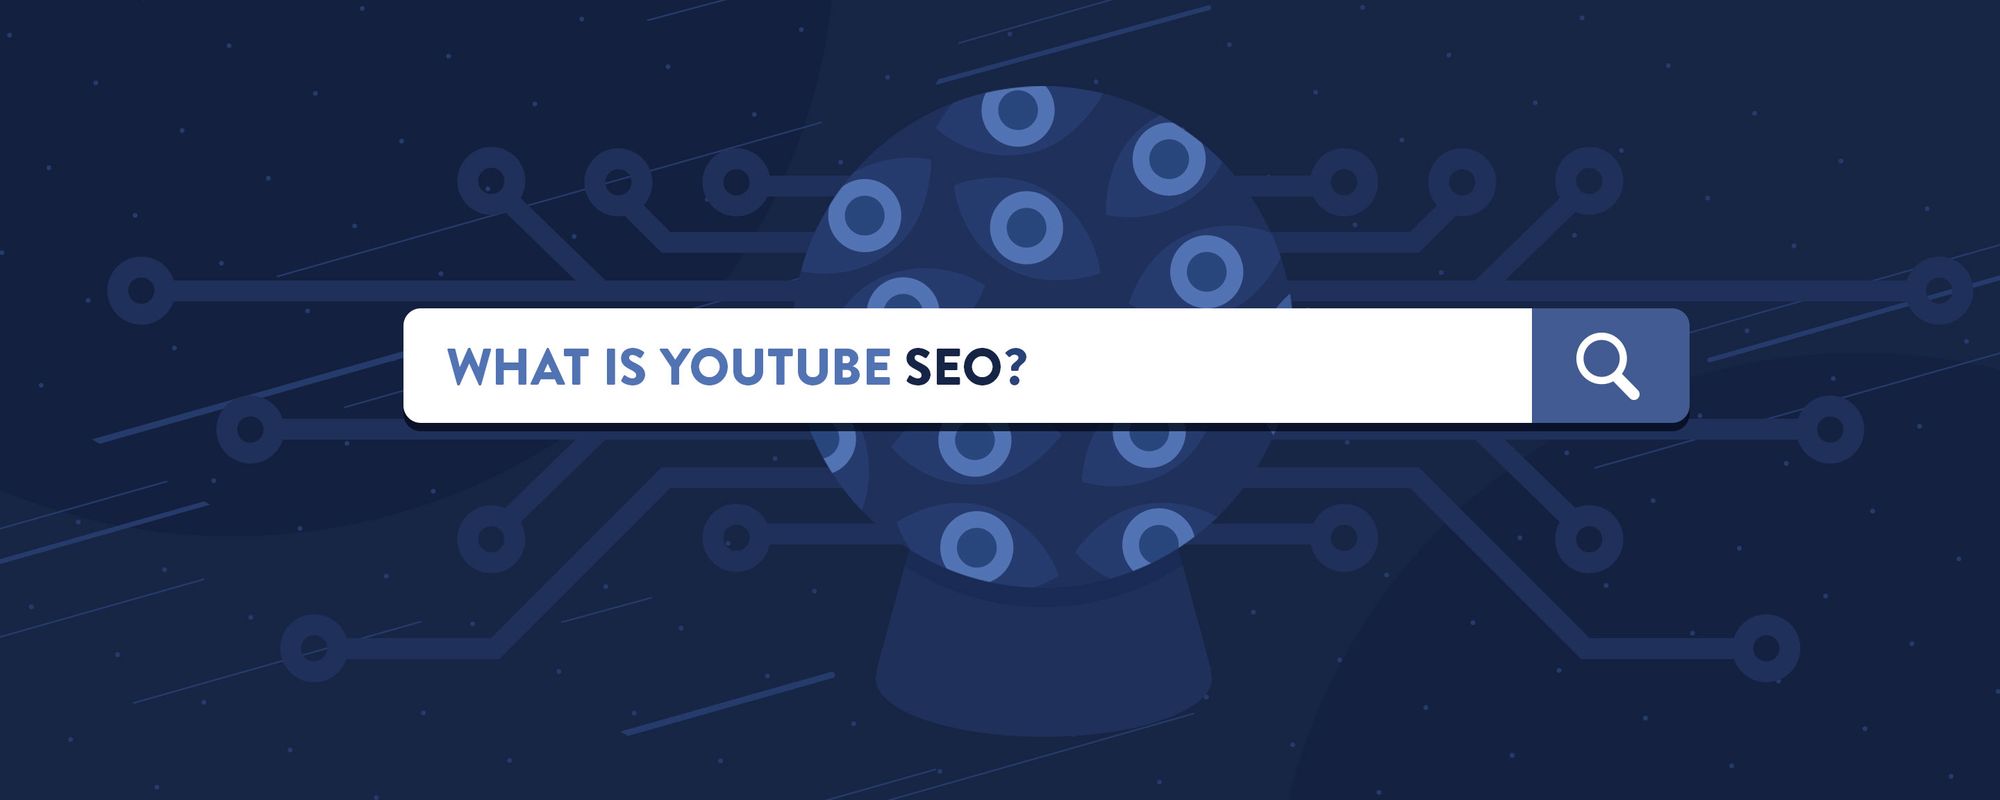 Illustration of search engine with the question 'What is YouTube SEO?'